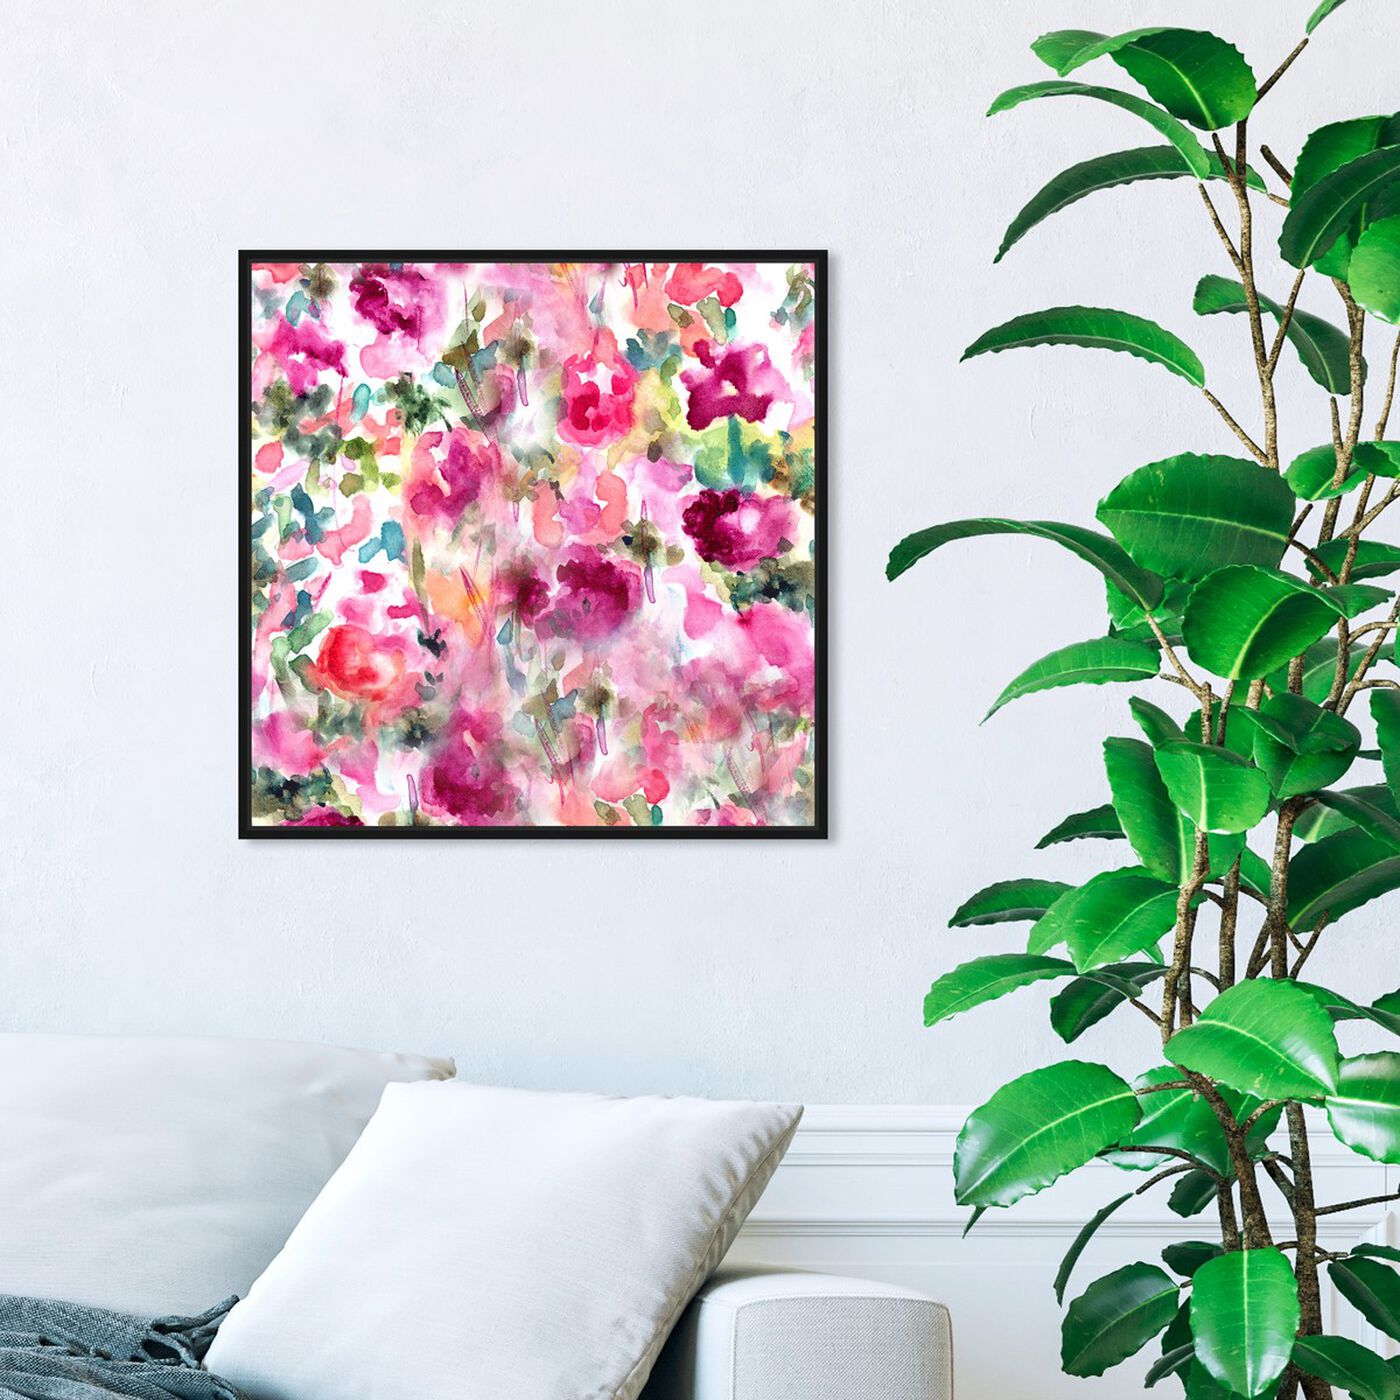 Hanging view of In Wonderful featuring floral and botanical and florals art.